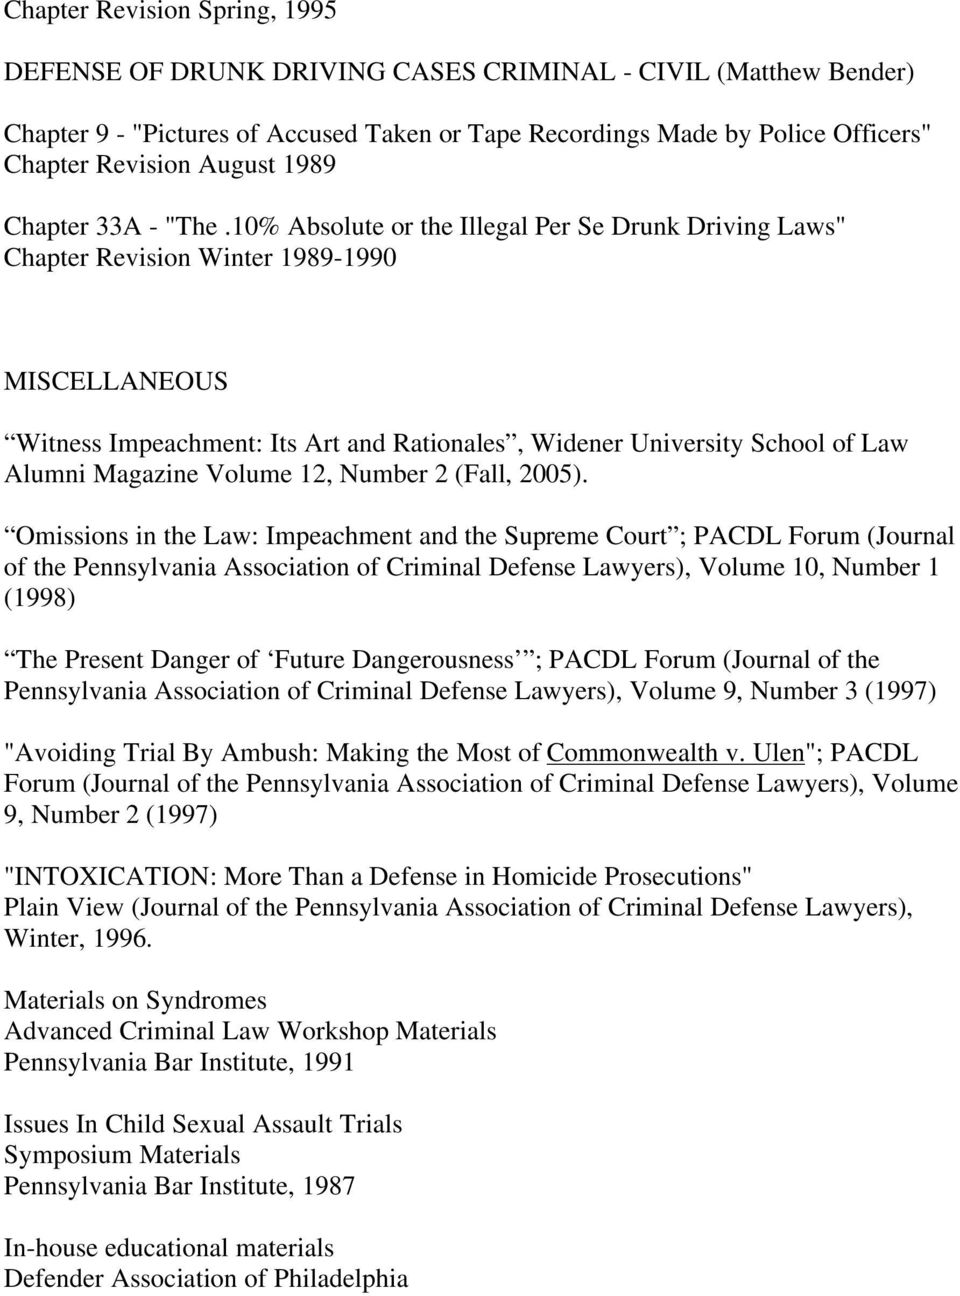 10% Absolute or the Illegal Per Se Drunk Driving Laws" Chapter Revision Winter 1989-1990 MISCELLANEOUS Witness Impeachment: Its Art and Rationales, Widener University School of Law Alumni Magazine